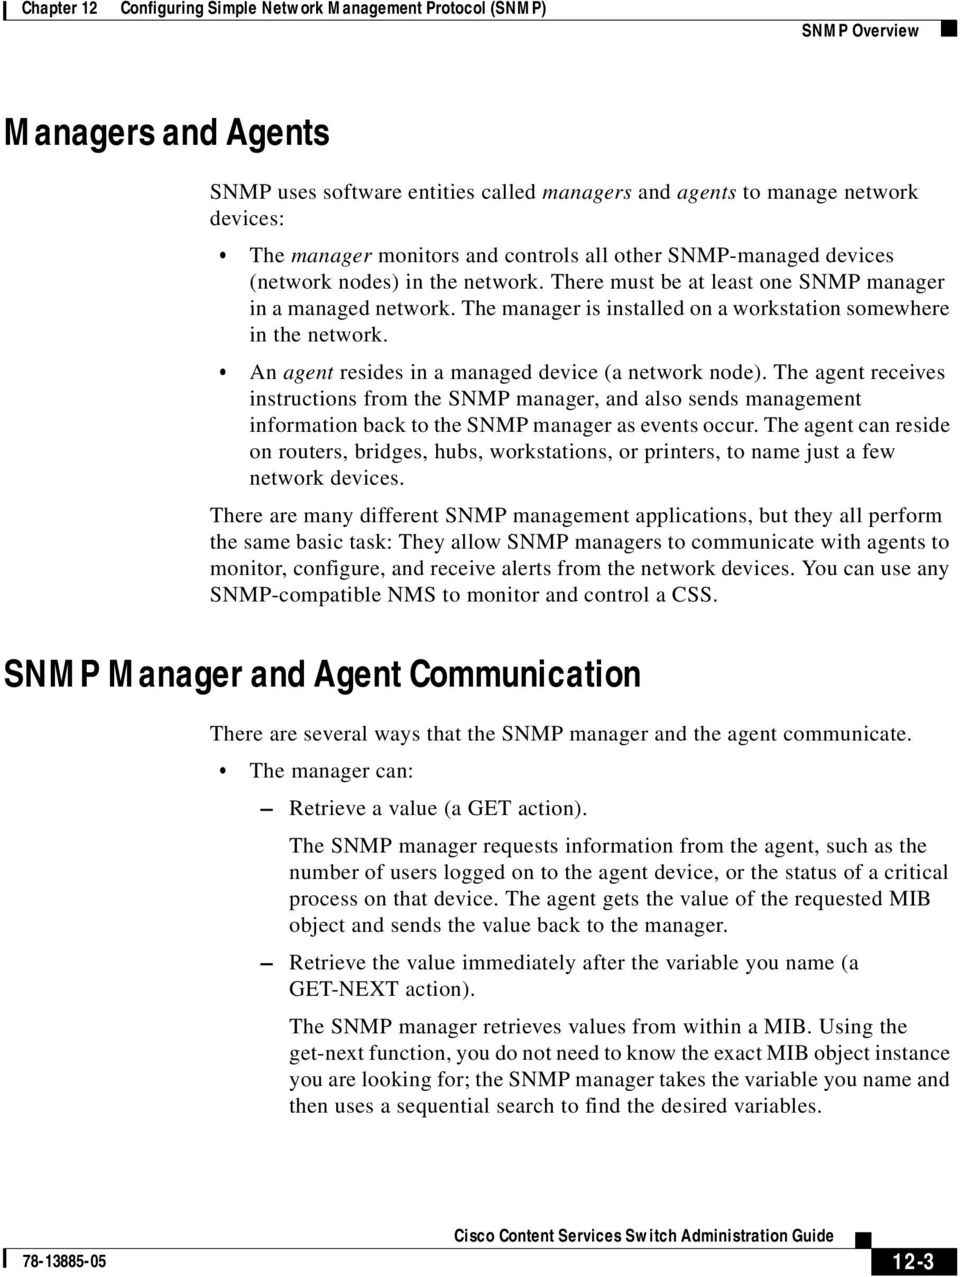 An agent resides in a managed device (a network node). The agent receives instructions from the SNMP manager, and also sends management information back to the SNMP manager as events occur.